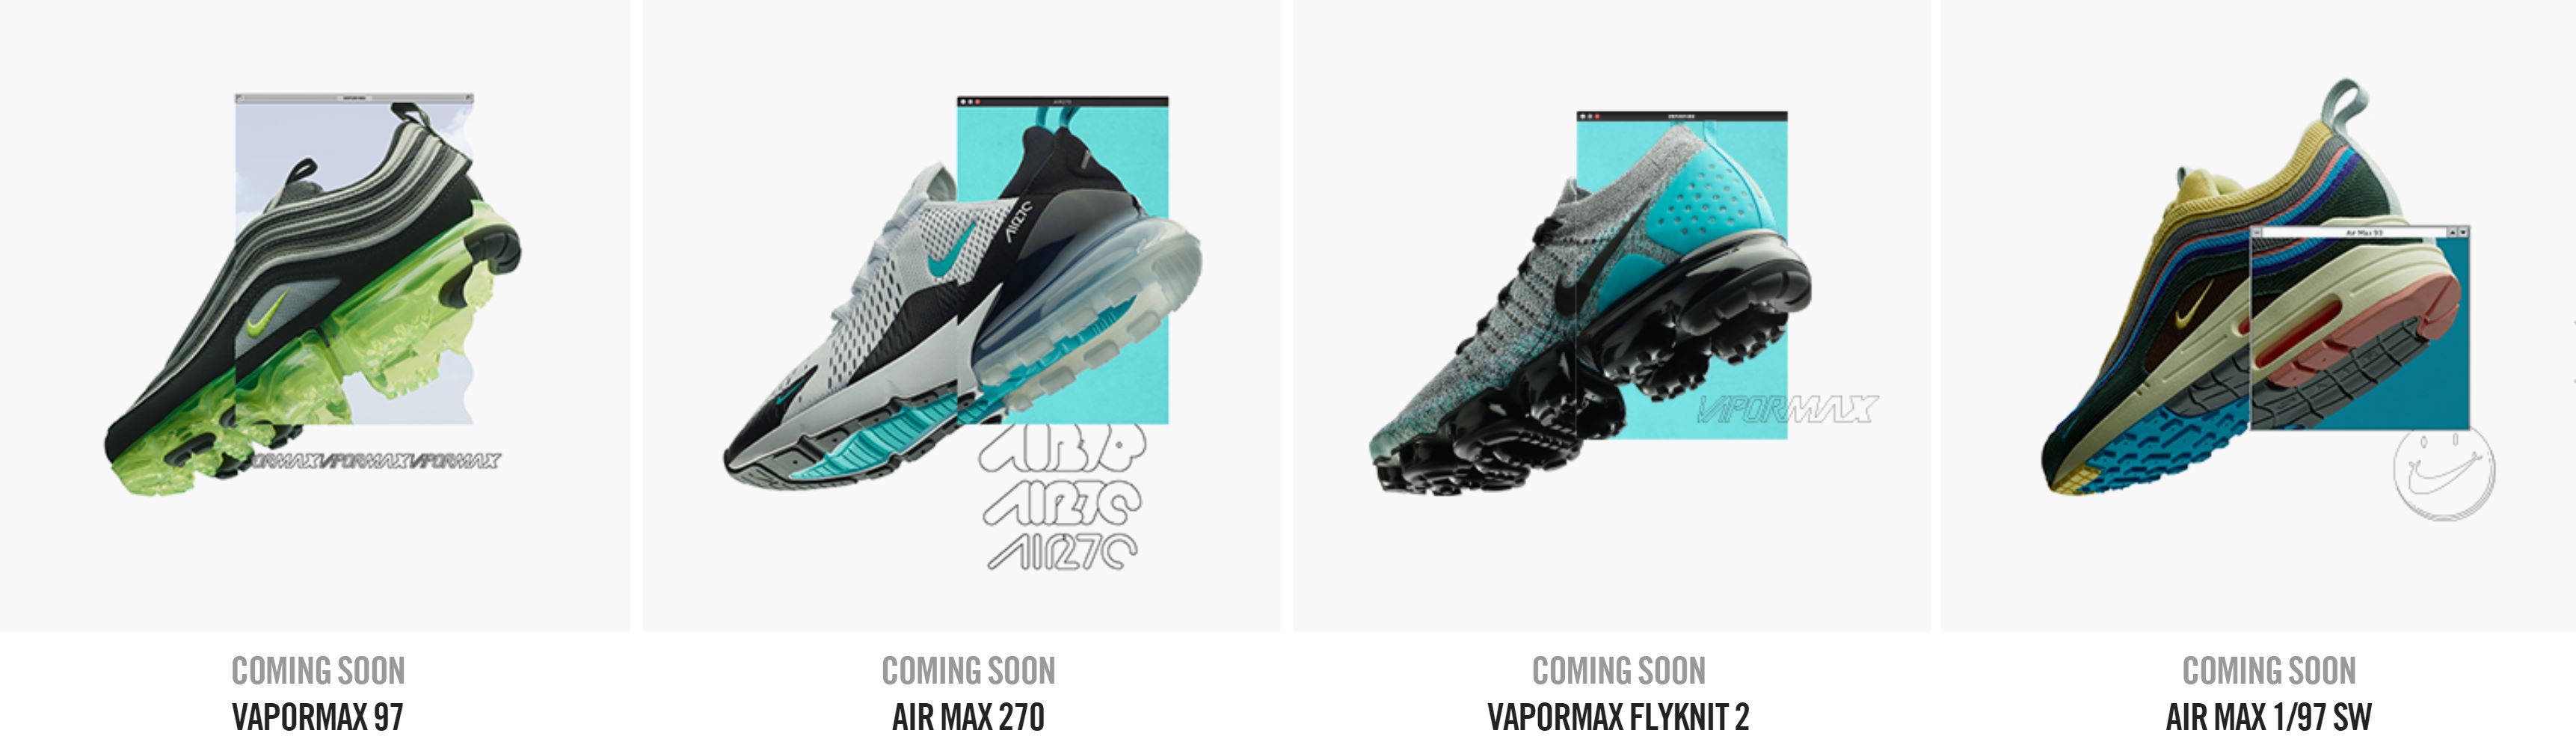 air max day 2018 releases